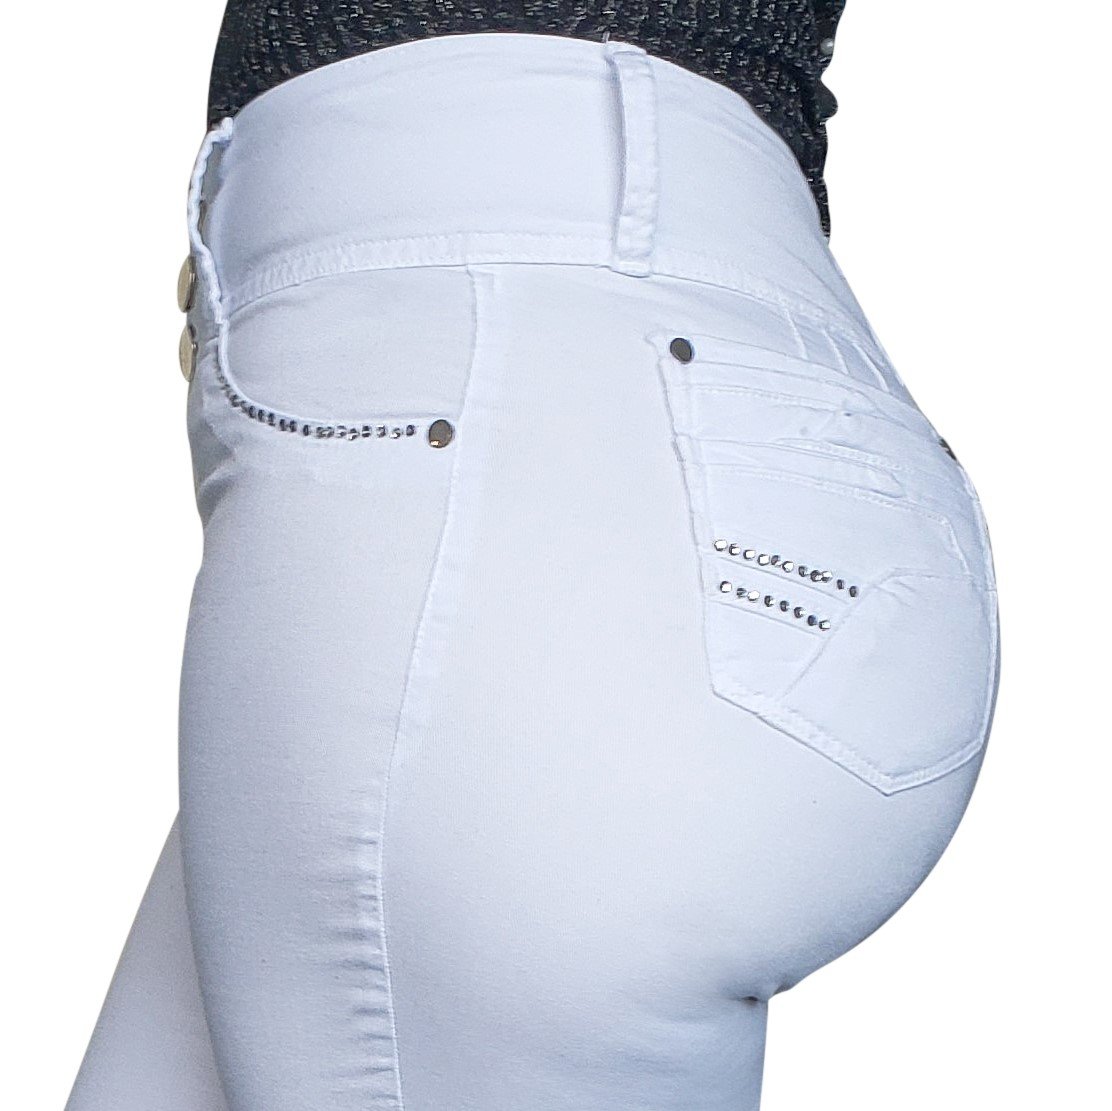 Moda Jeans- 100% Made in Medellin, Colombia, Butt Lifter Womens Jeans - image 2 of 37